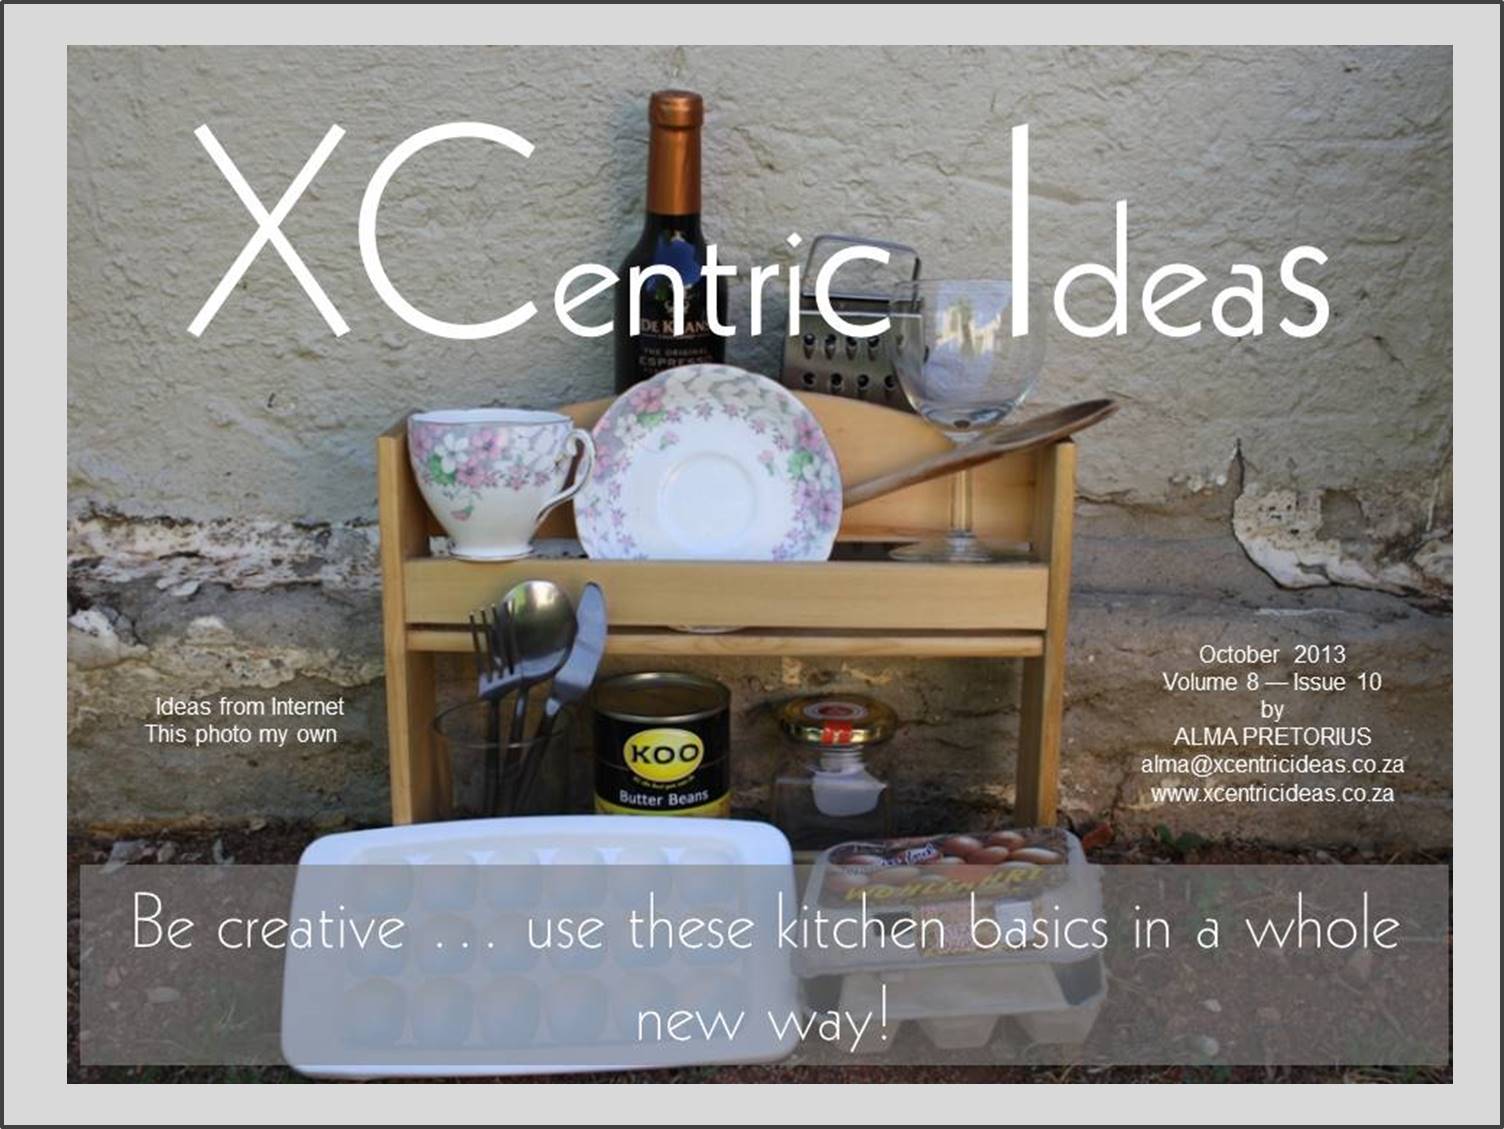 XCentric Ideas 2013 Issue 10